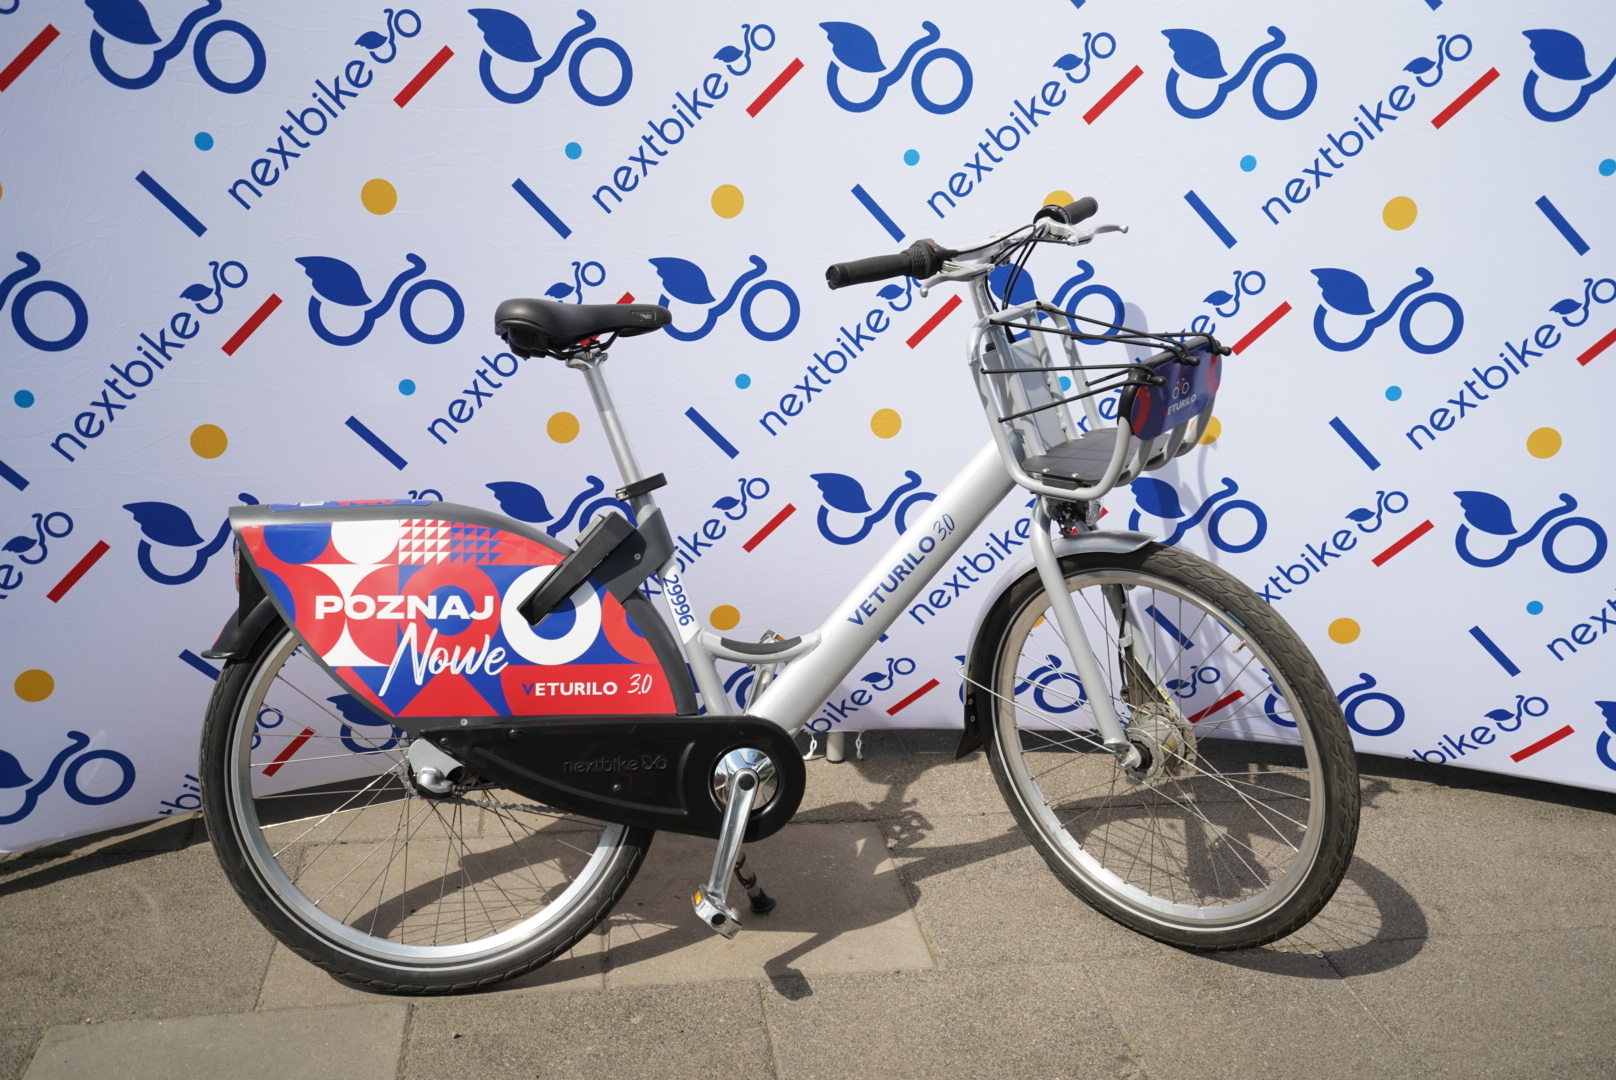 nextbike wins largest bike-share system in Poland